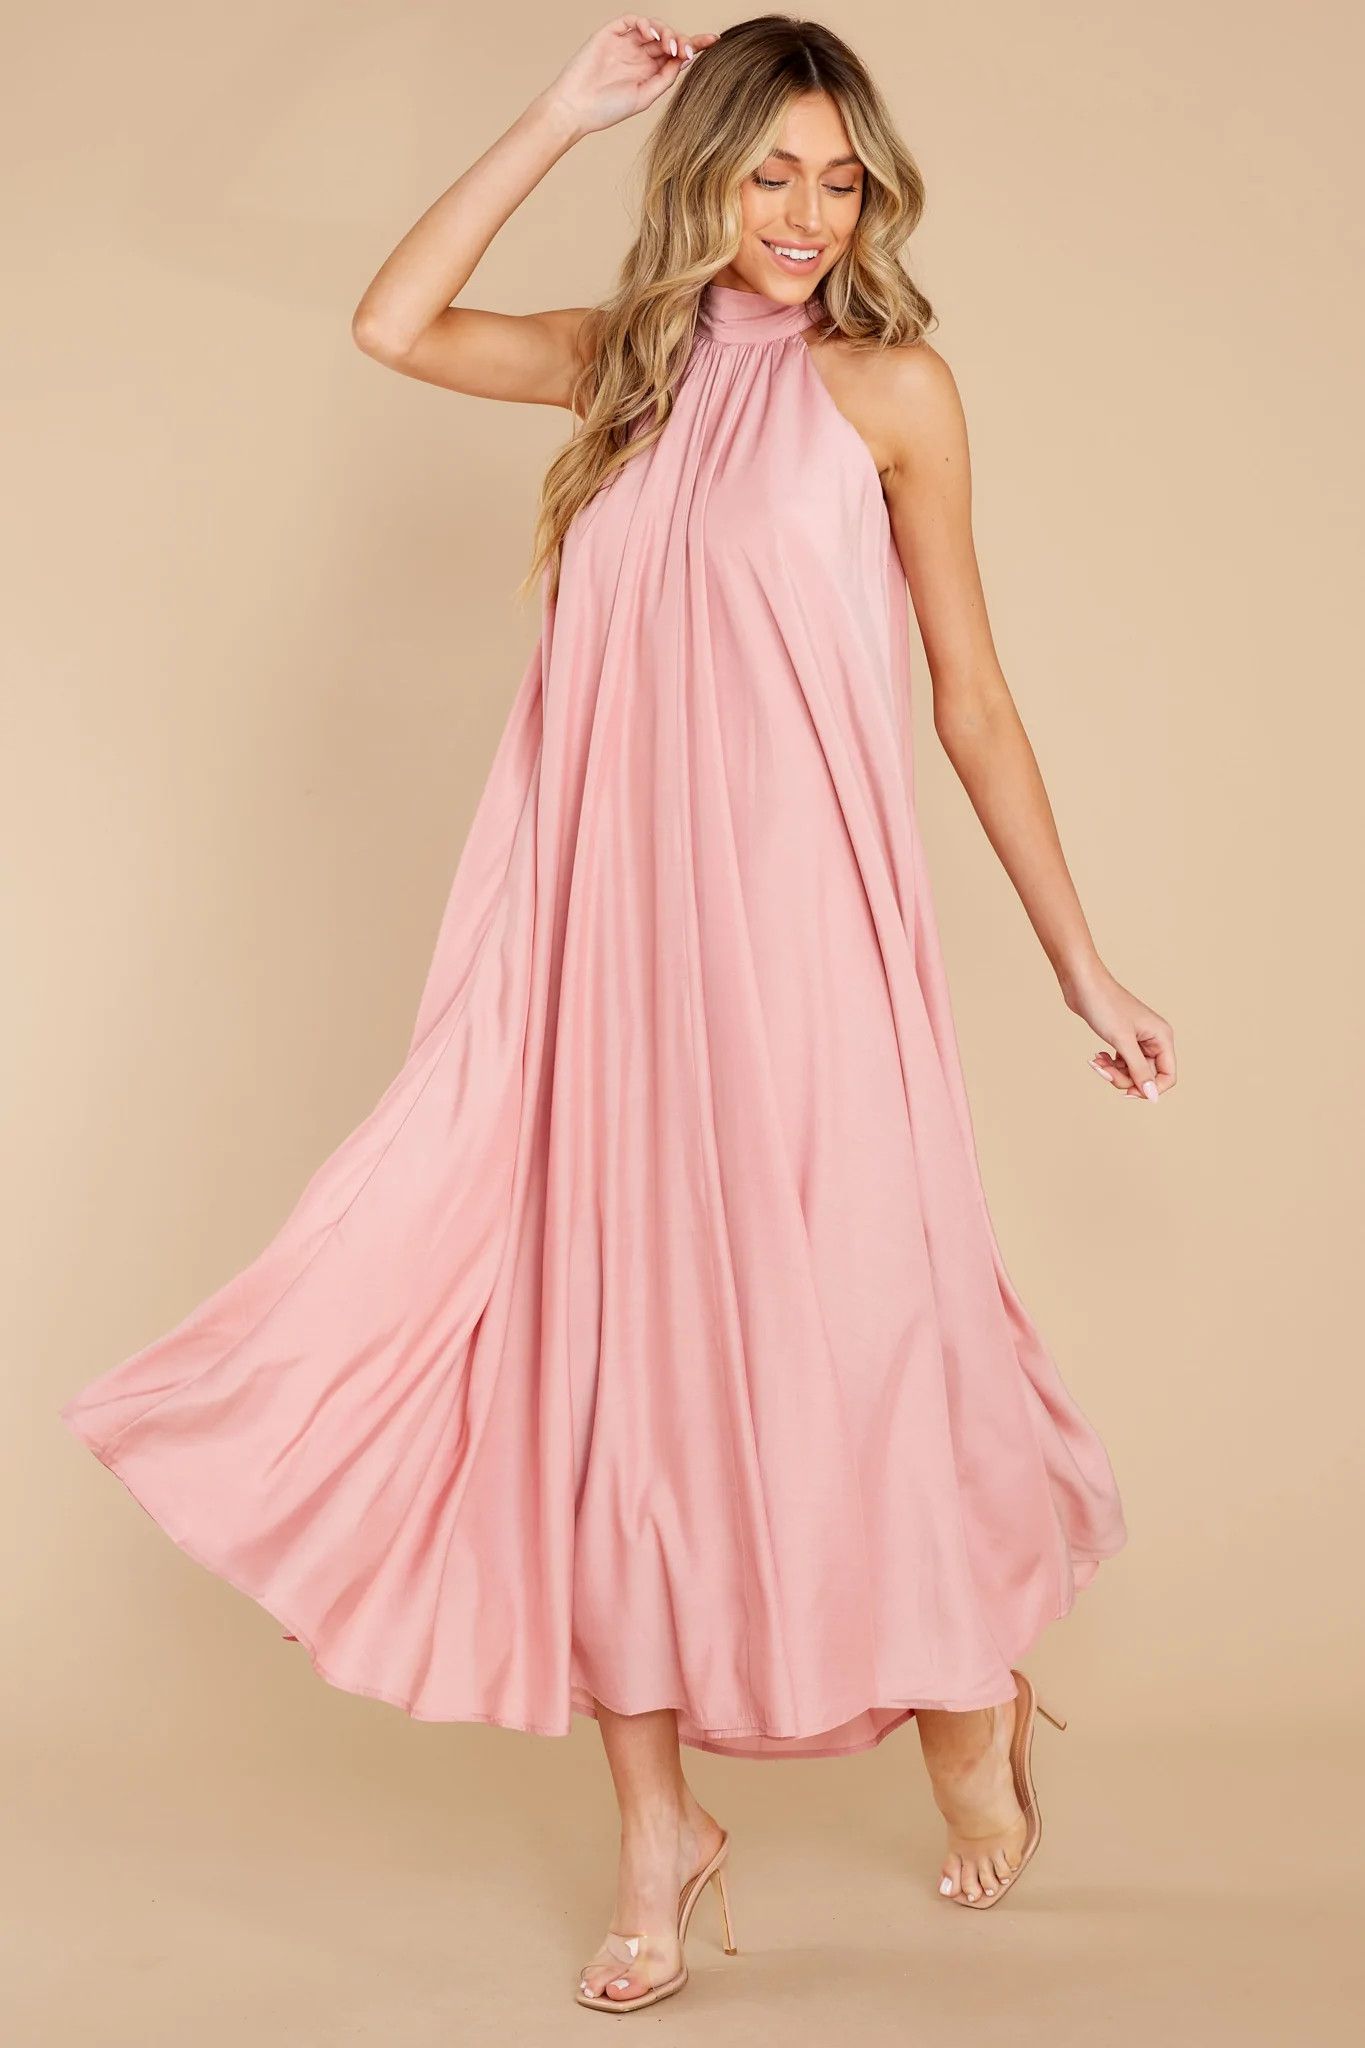 Worth Every Penny Rose Pink Maxi Dress, Pink Dress, Pink Spring Dress, Pink Dresses | Red Dress 